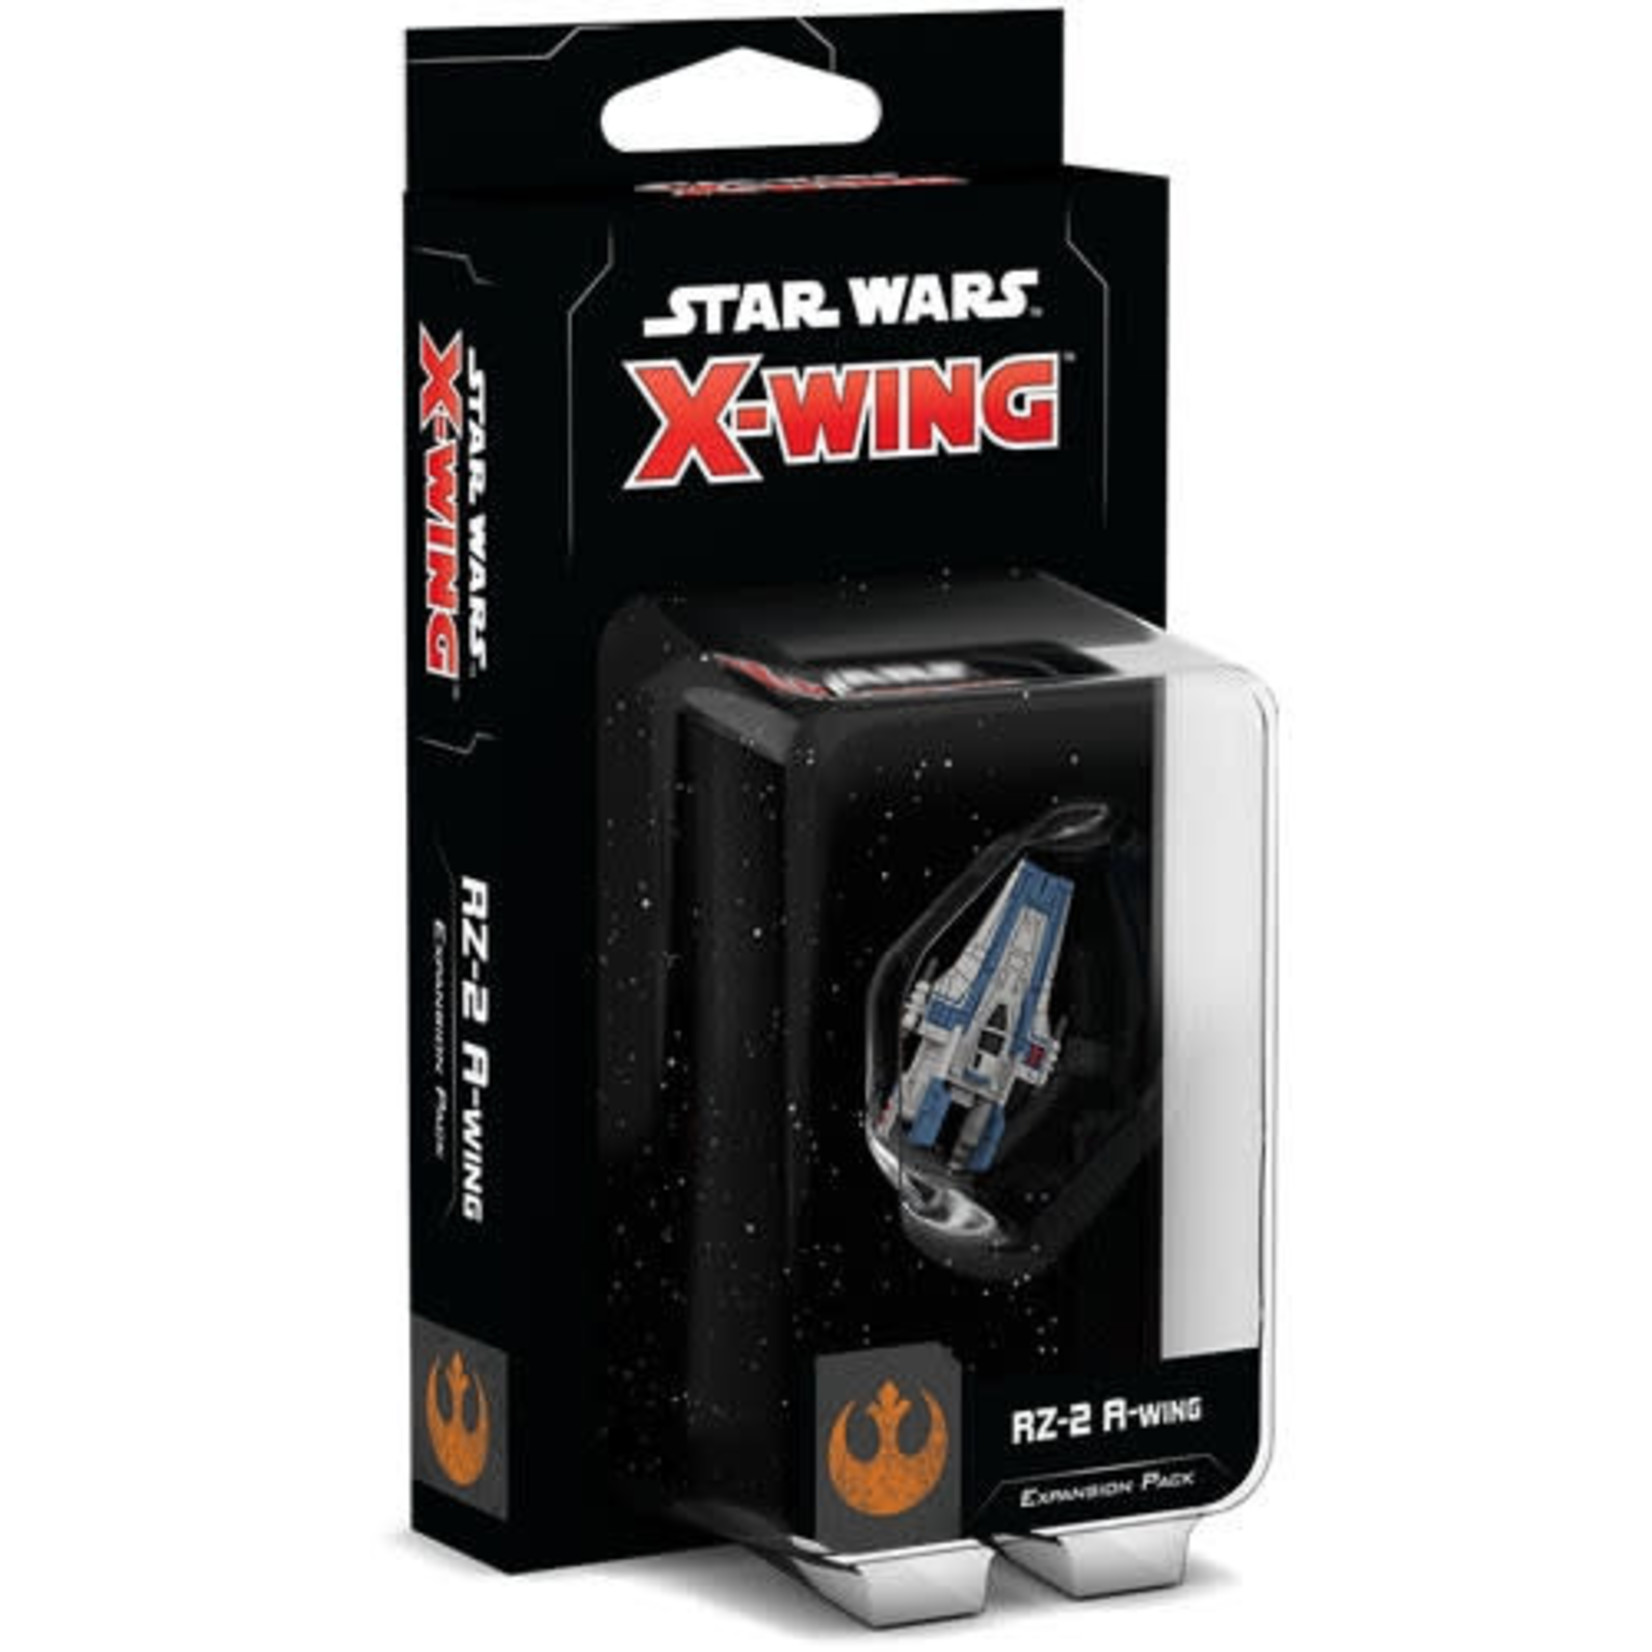 Star Wars X-Wing 2e: RZ-2 A-Wing Expansion Pack